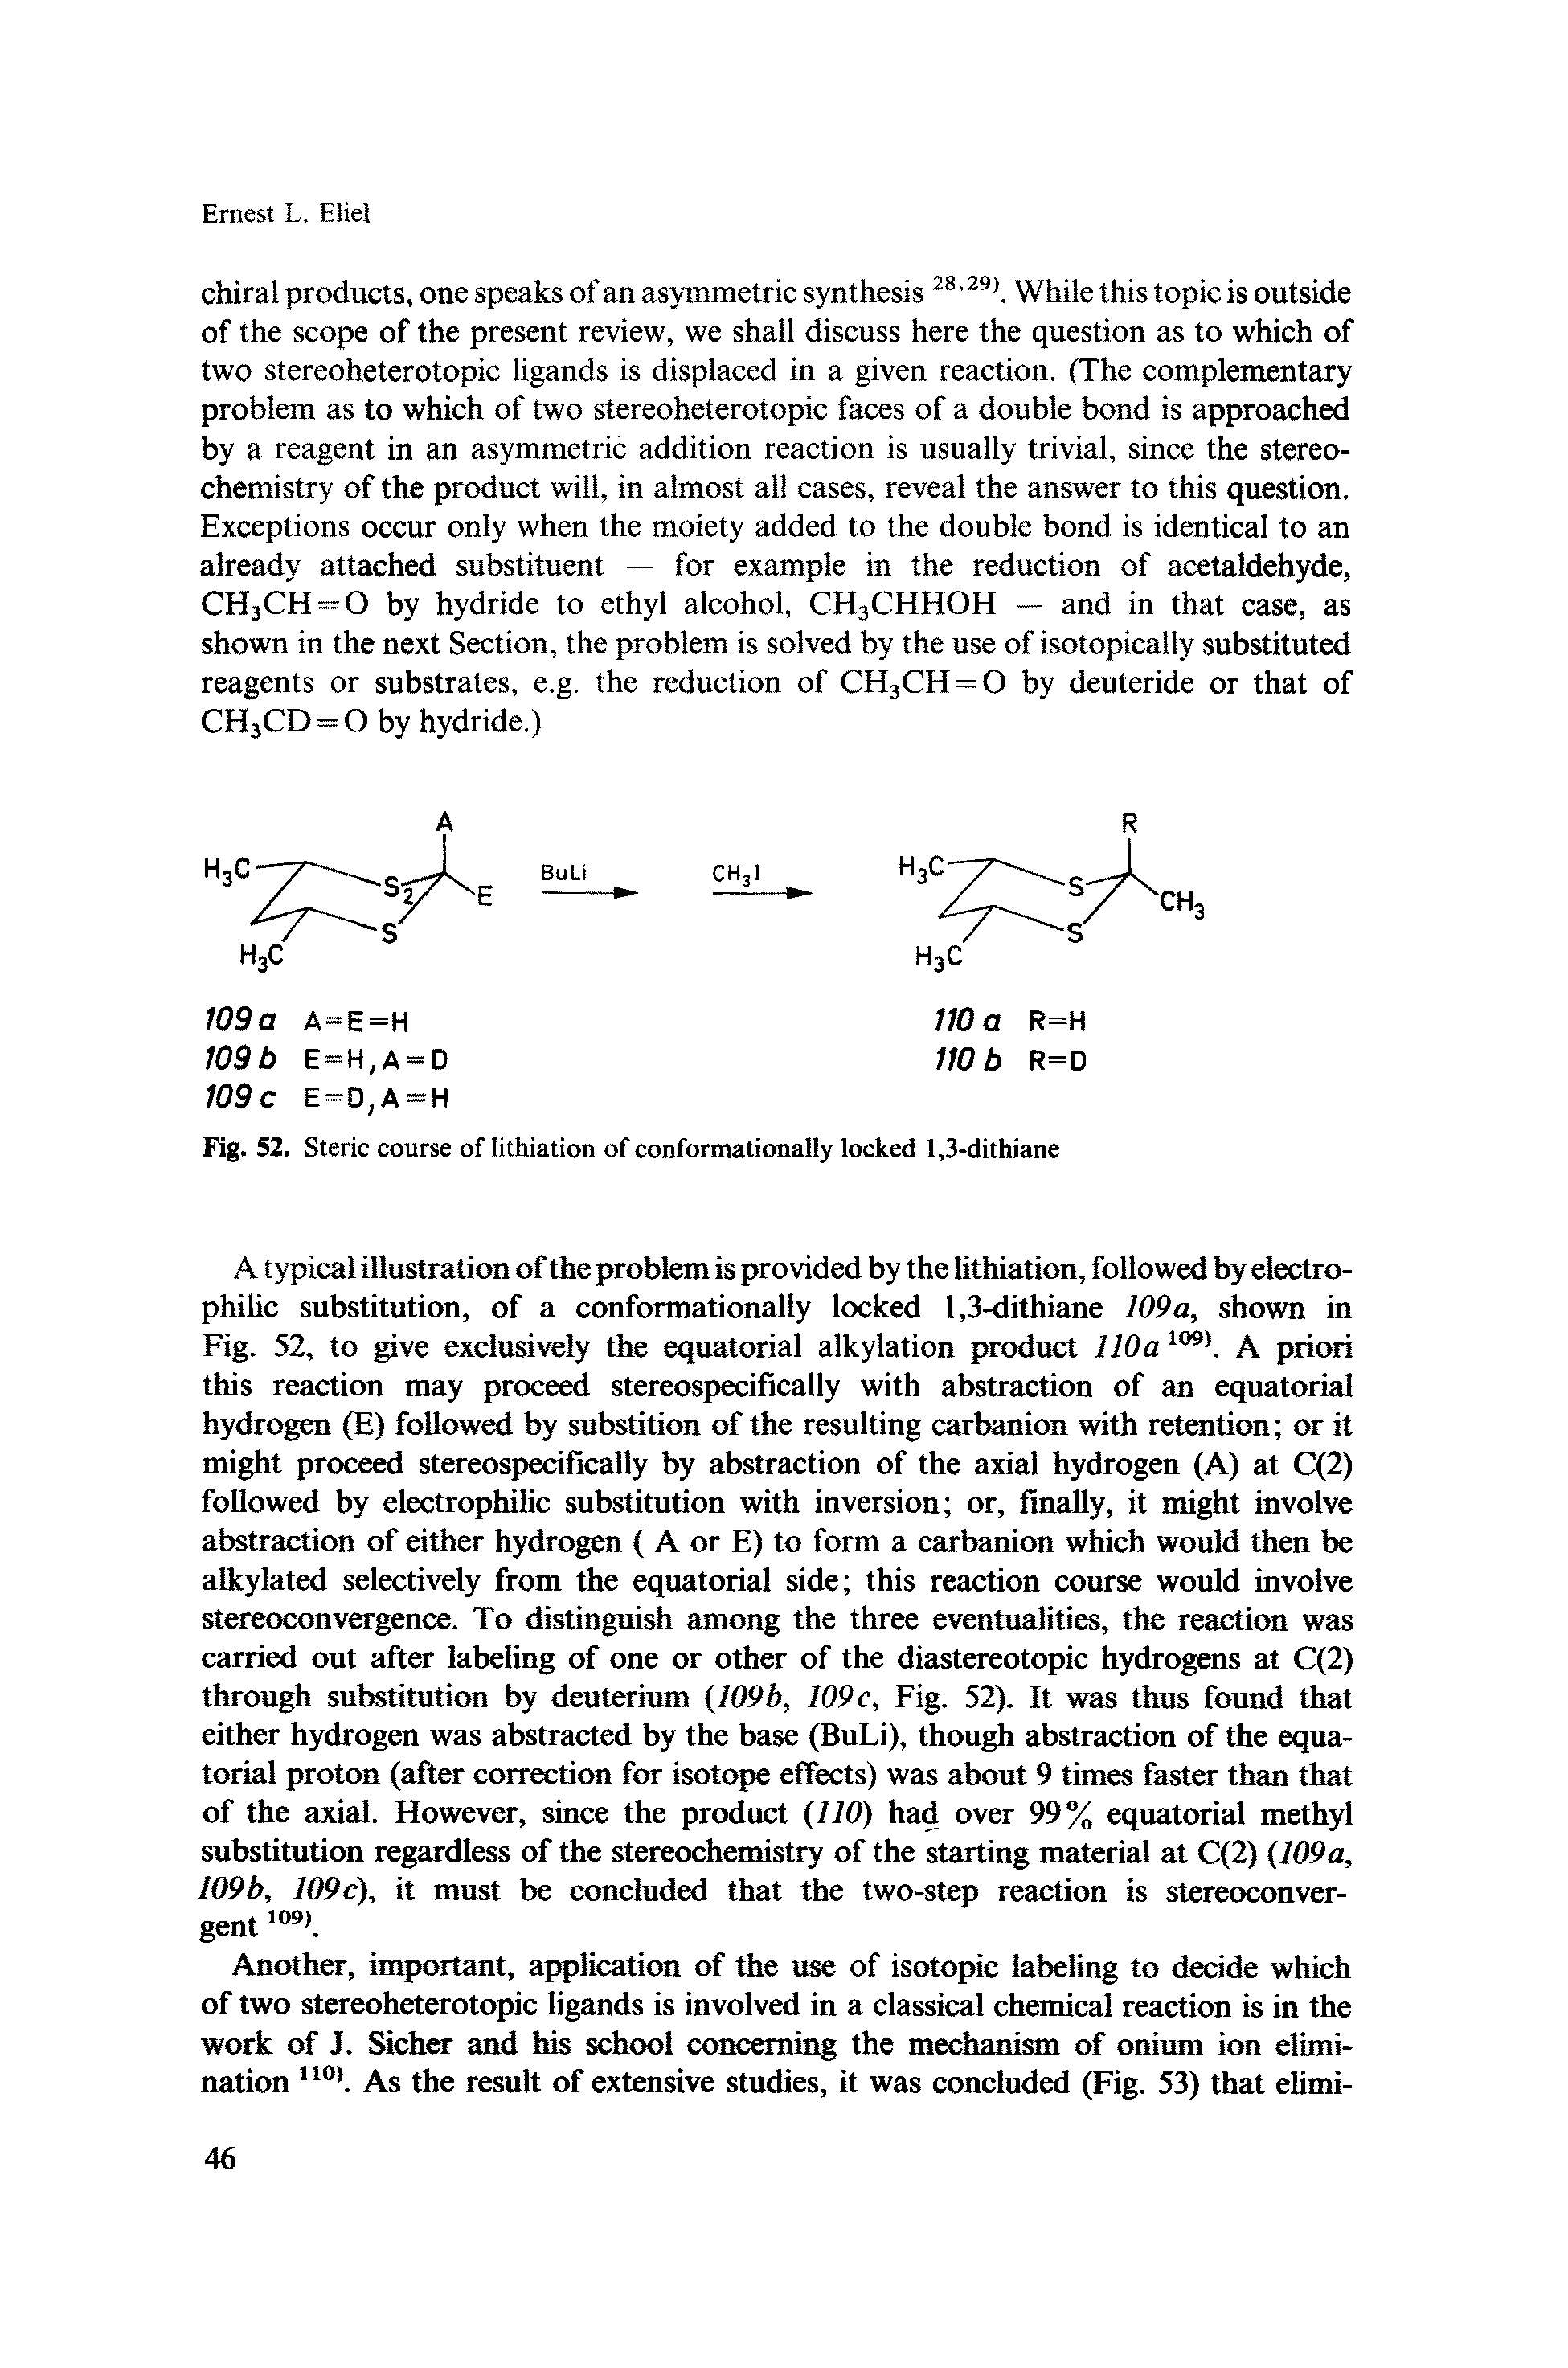 Fig. 52. Steric course of lithiation of conformationally locked 1,3-dithiane...